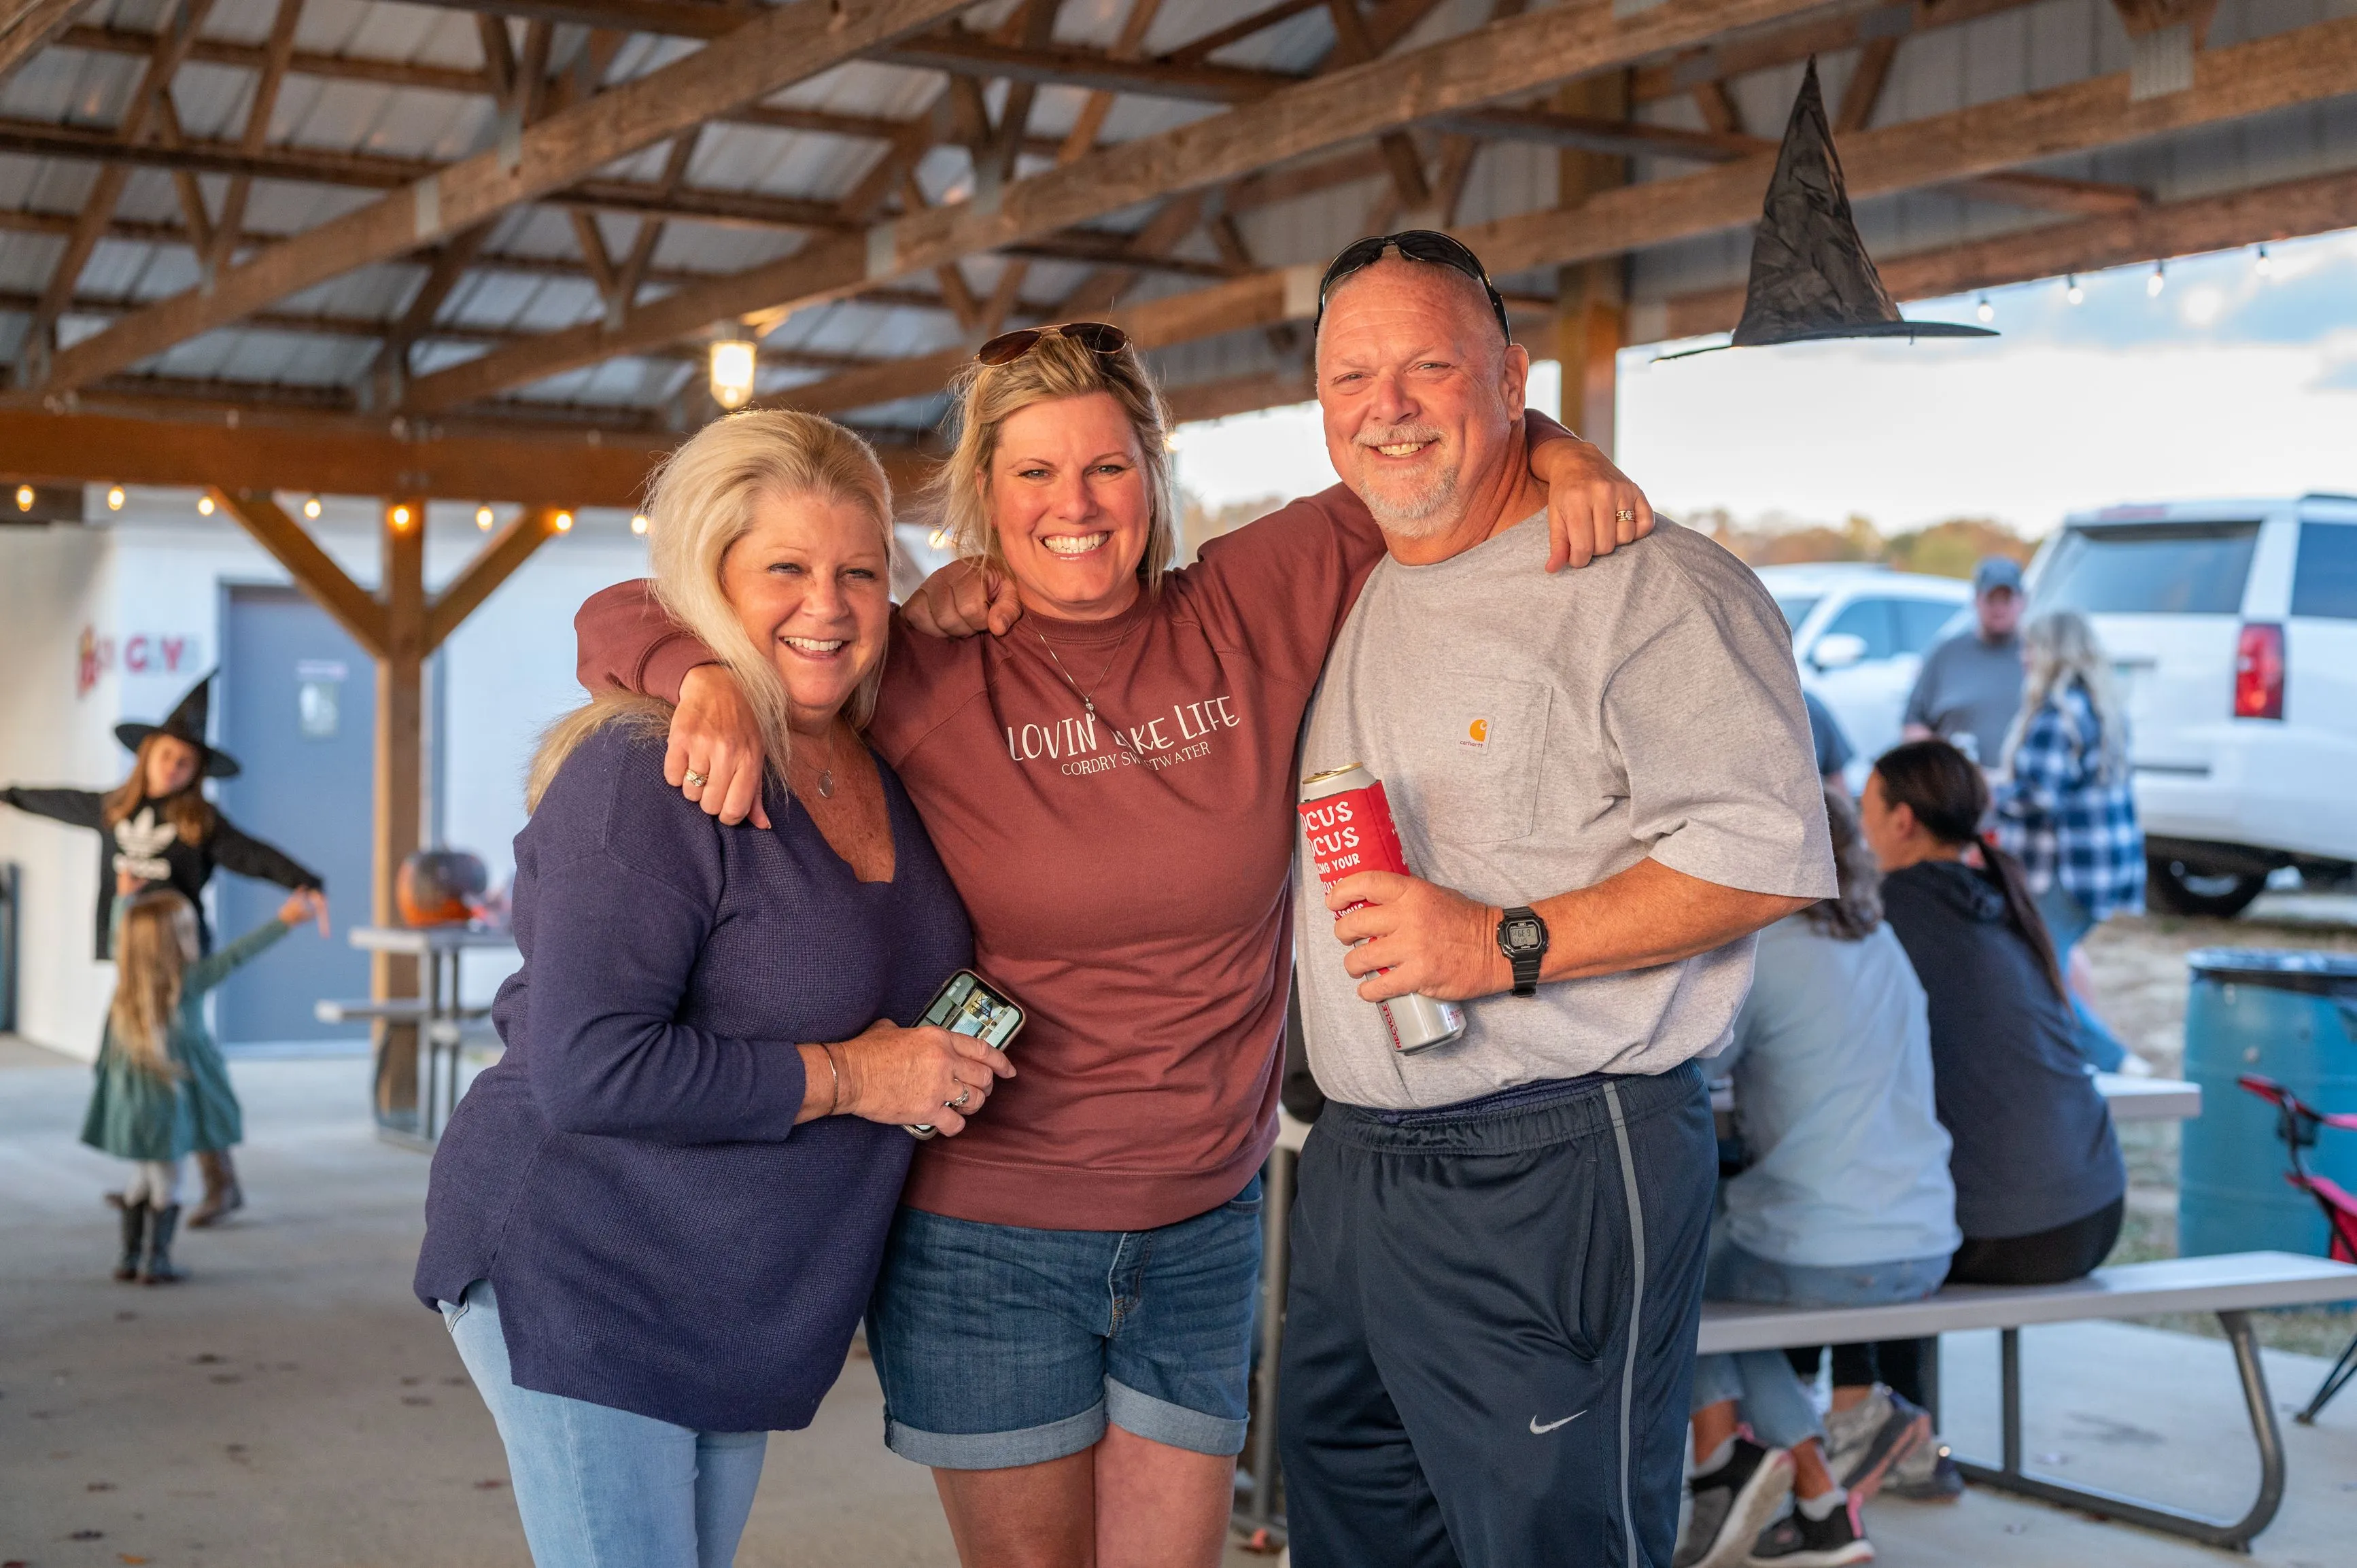 Three people smiling and posing for a photo at an outdoor gathering under a shelter.